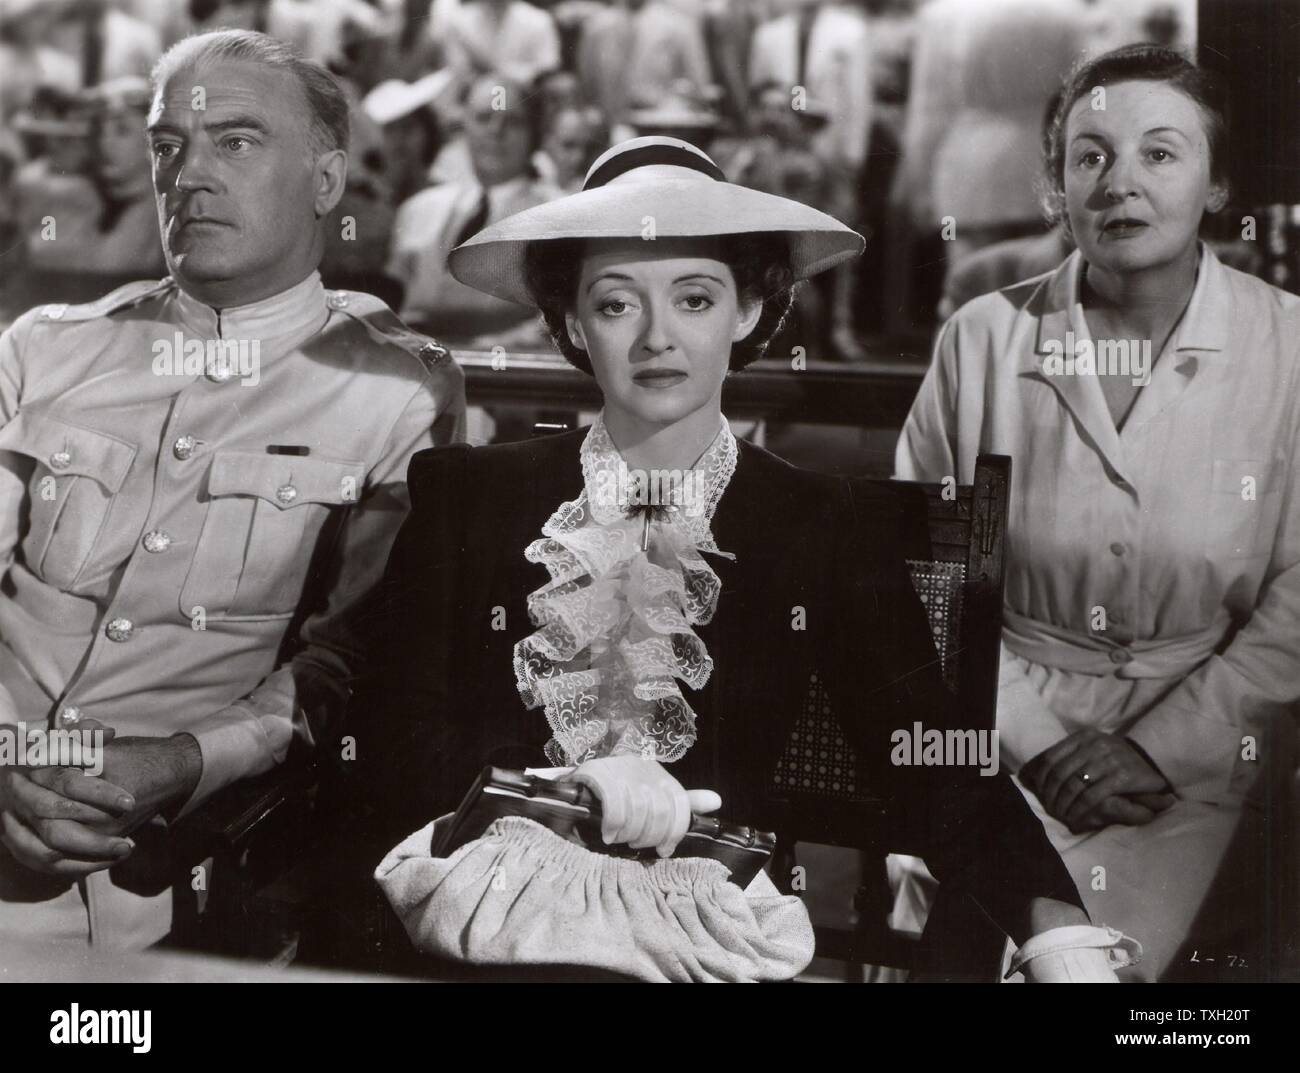 'The Letter', Warner Bros., 1940.   Producer: Robert Lord.  Director: William Wyler.  Based on short story by the English author Somerset Maugham.  Film starring Bette Davis (1908-1989) American Hollywood actress and film star. Leslie Crosbie (played by Davis) on trial. Stock Photo